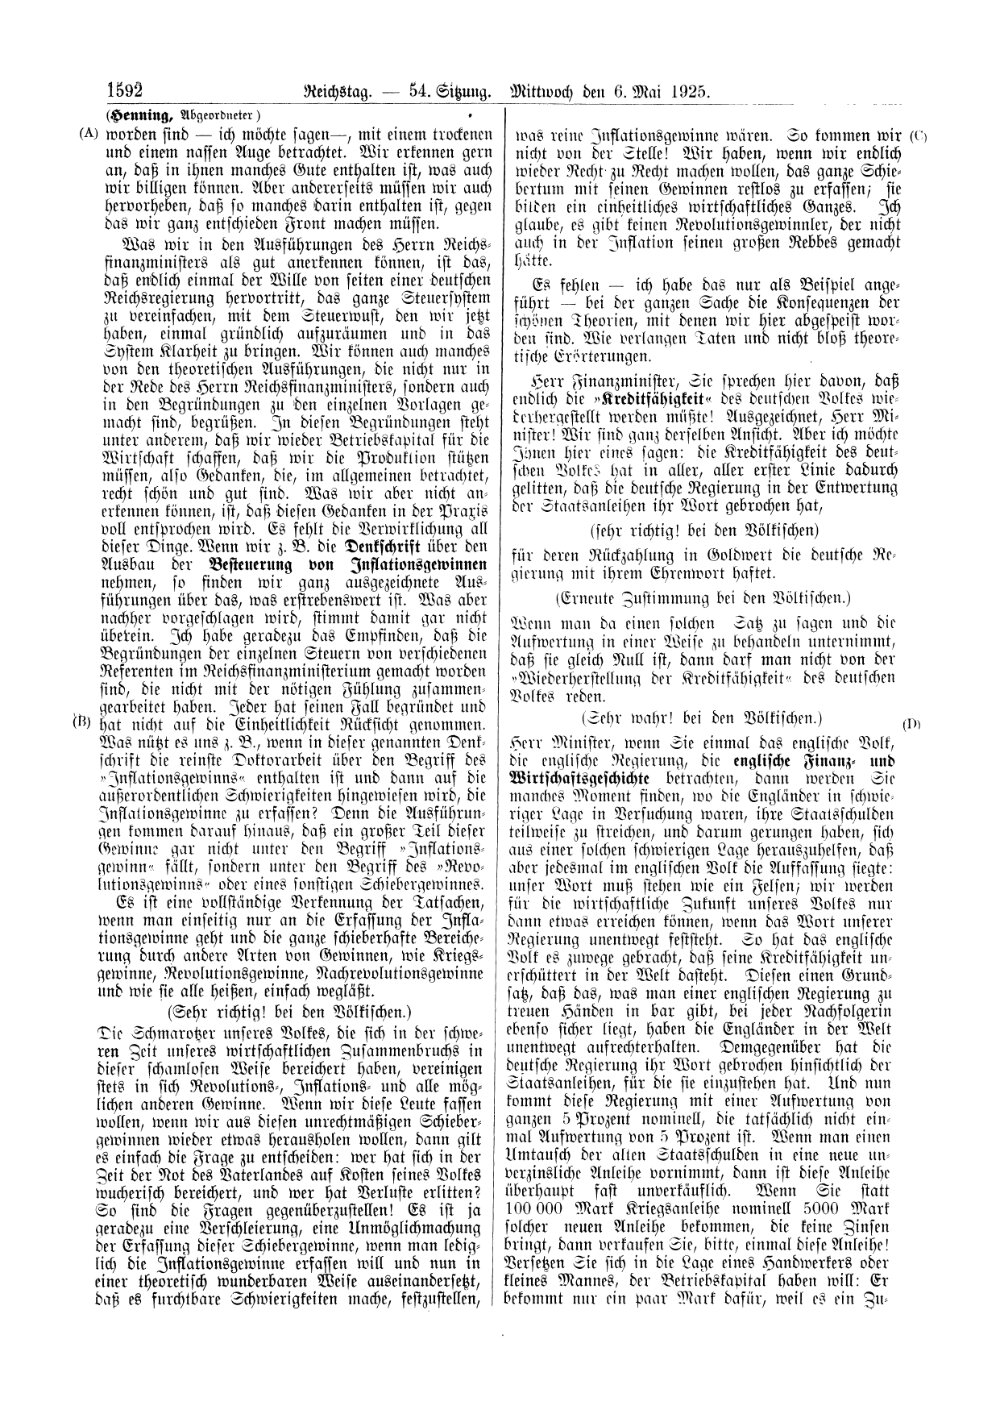 Scan of page 1592